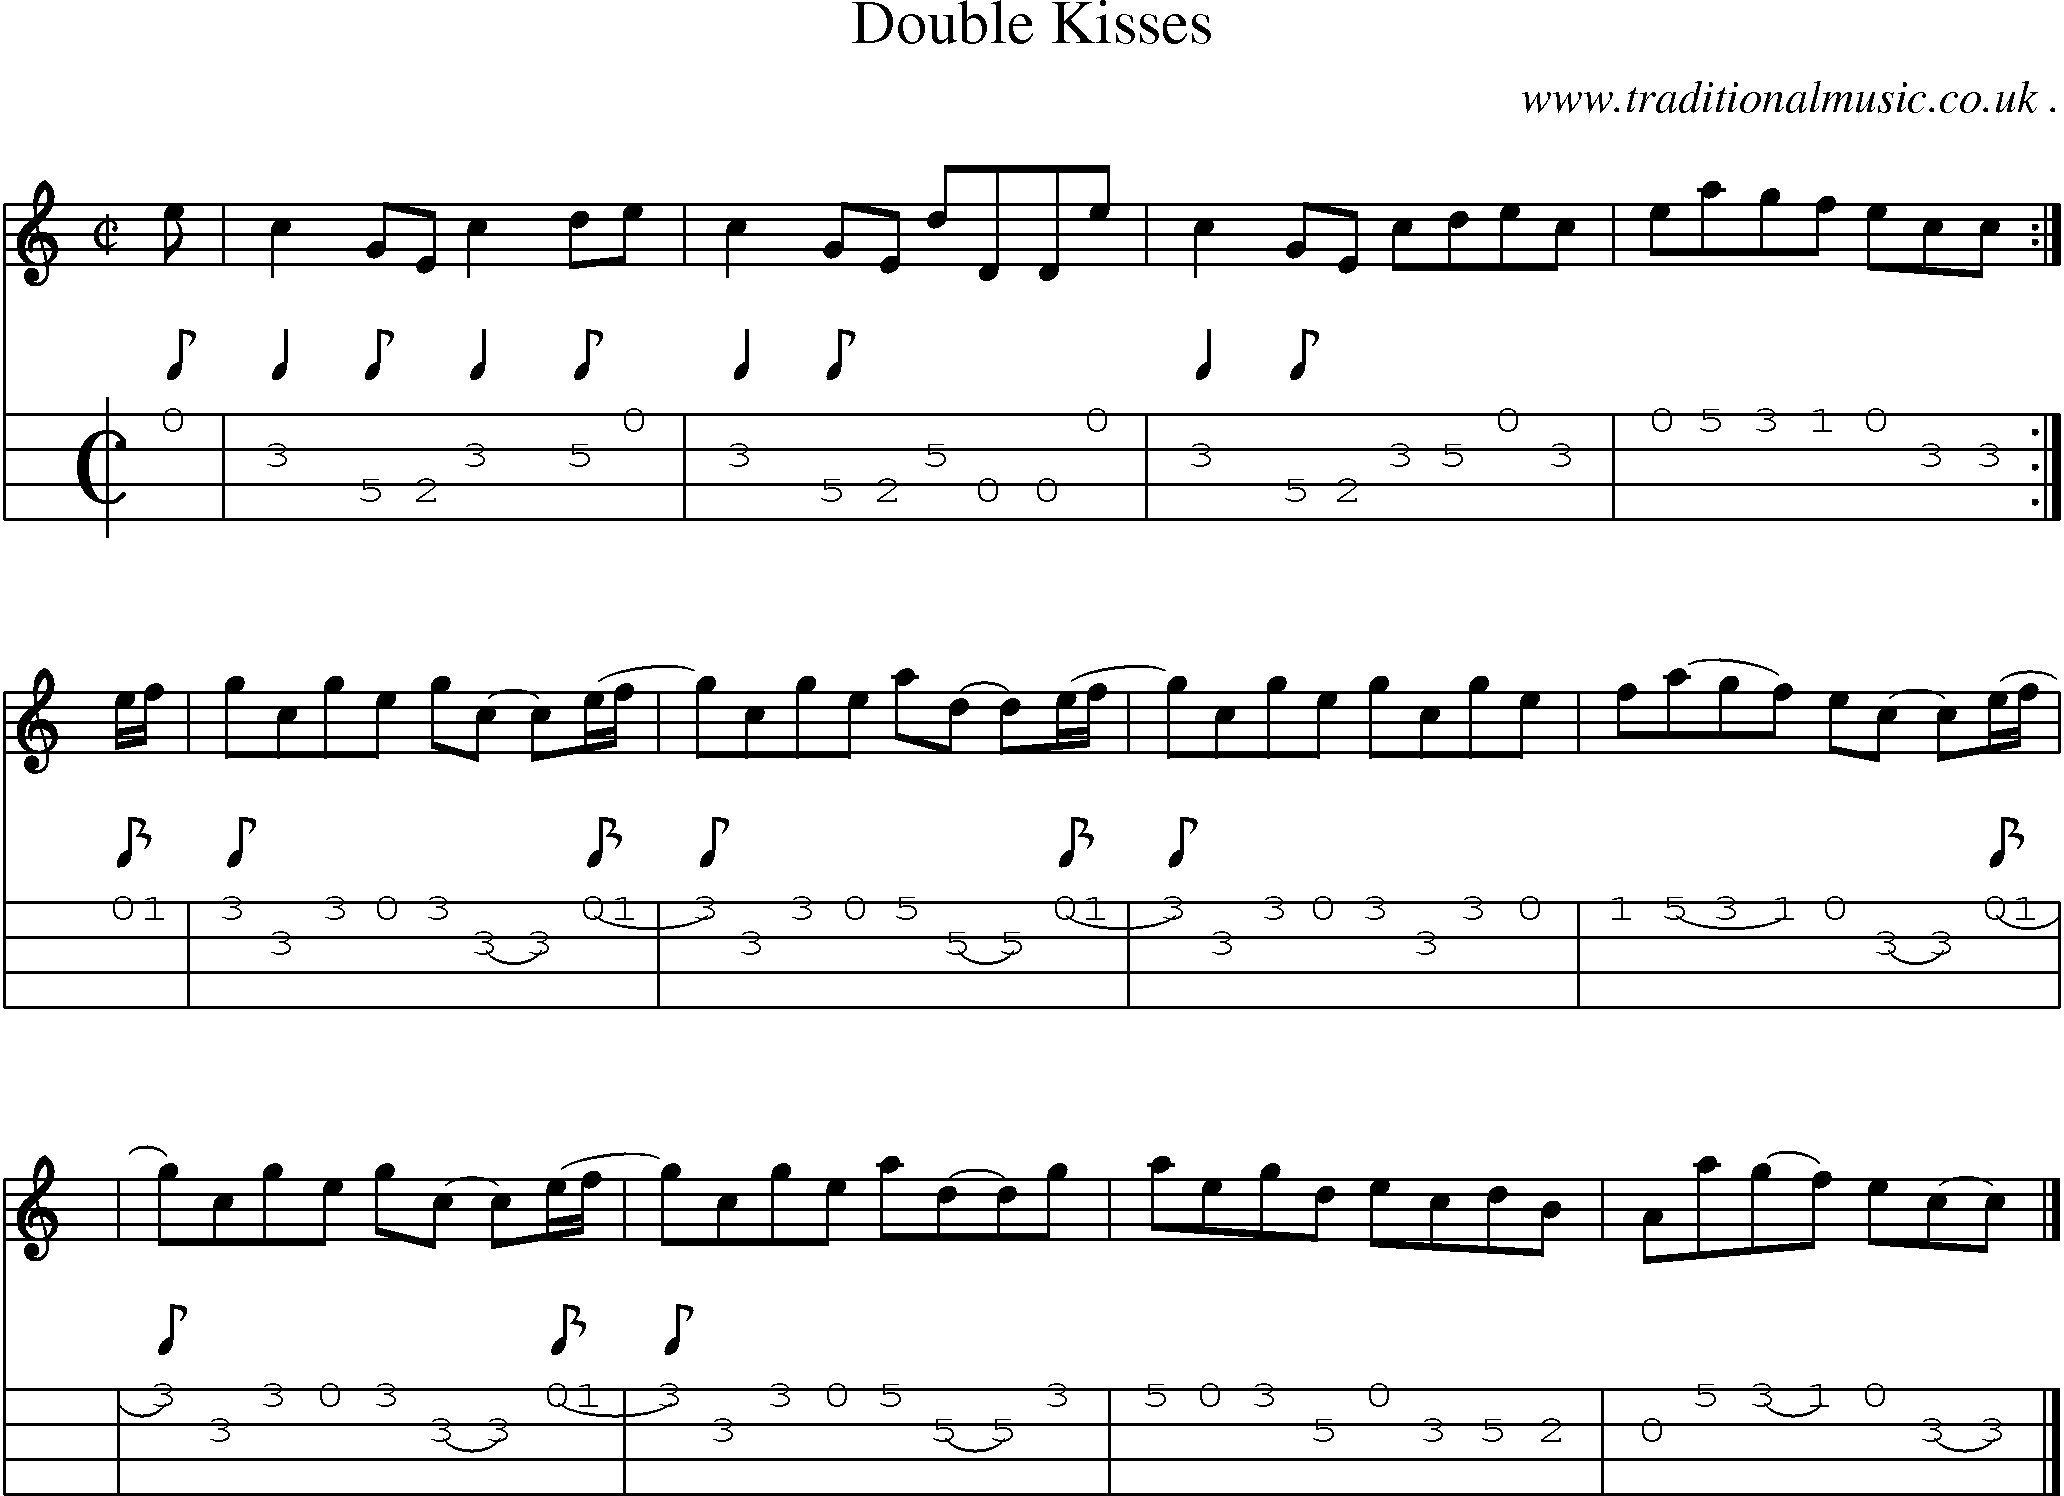 Sheet-music  score, Chords and Mandolin Tabs for Double Kisses